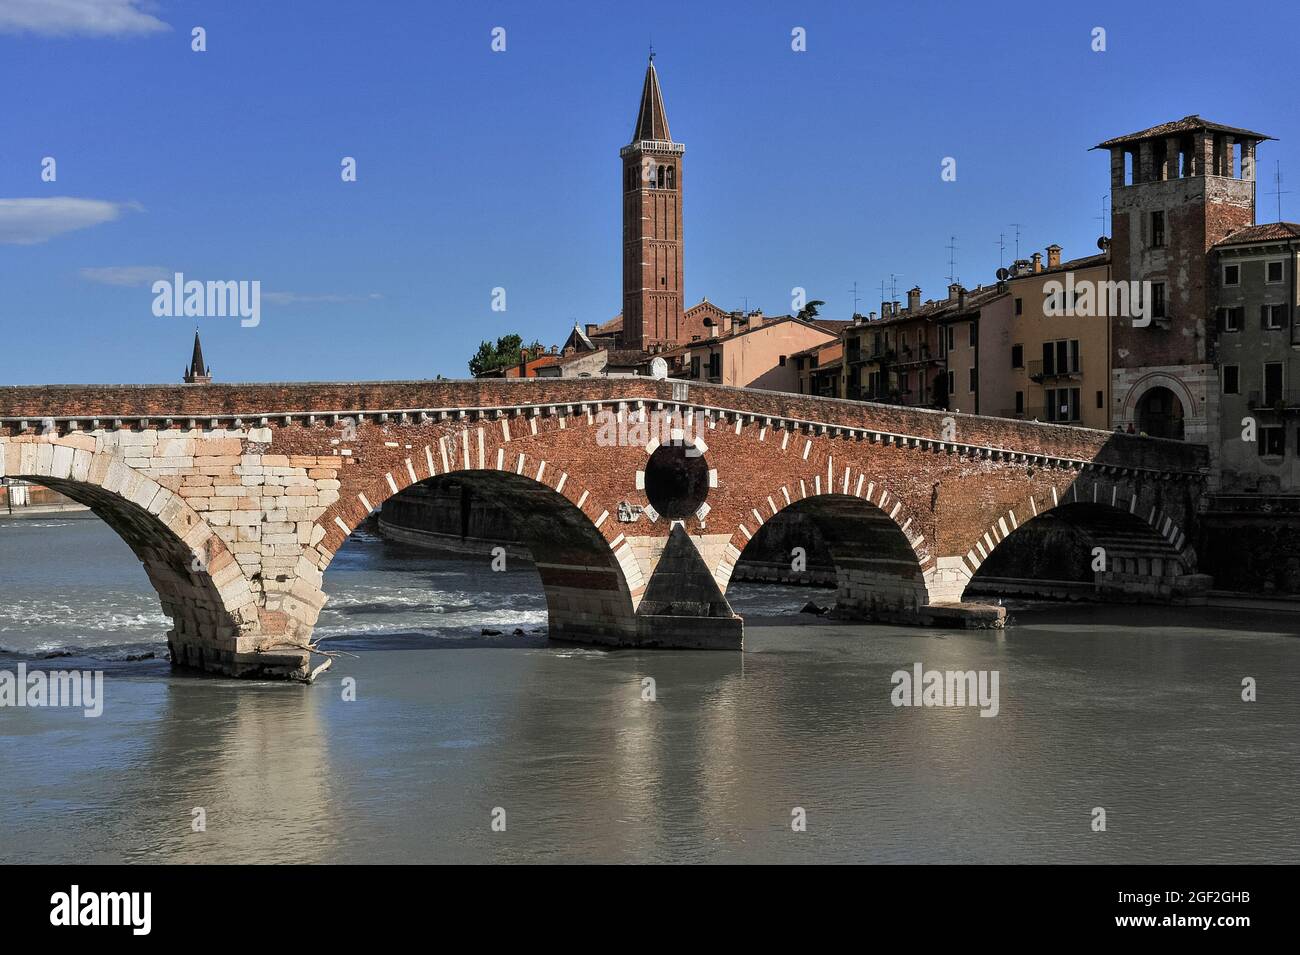 The Church of Santa Anastasia’s 1400s  brick tower rises beyond an important Roman monument in Verona, Veneto, Italy: the donkey-back Ponte della Pietra (Stone Bridge) spanning the alpine River Adige.  The original Pons Marmoreus carried the busy Via Postumia Roman road linking Verona to cities in Italy's far west and east, but often collapsed in floods and was rebuilt partly in brick.  Retreating German troops blew up four of the five arches in 1945. Today’s bridge, rebuilt in the 1950s, has two eastern stone Roman arches, two 16th century Venetian arches and a western arch rebuilt in 1298. Stock Photo